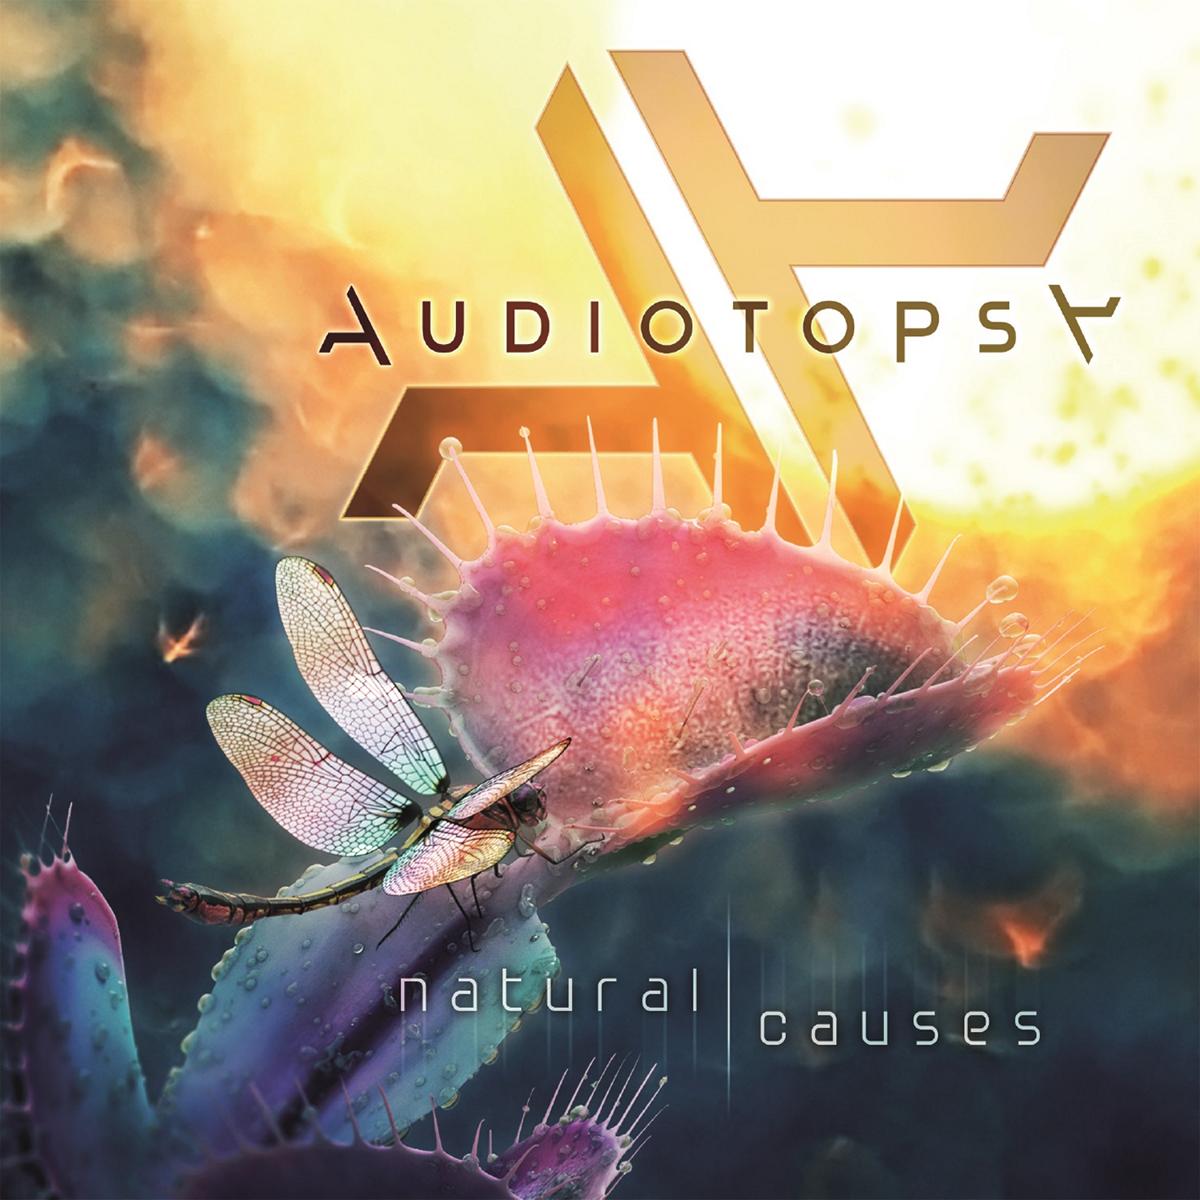 Audiotopsy-Natural Causes 16_Page_Booklet.indd